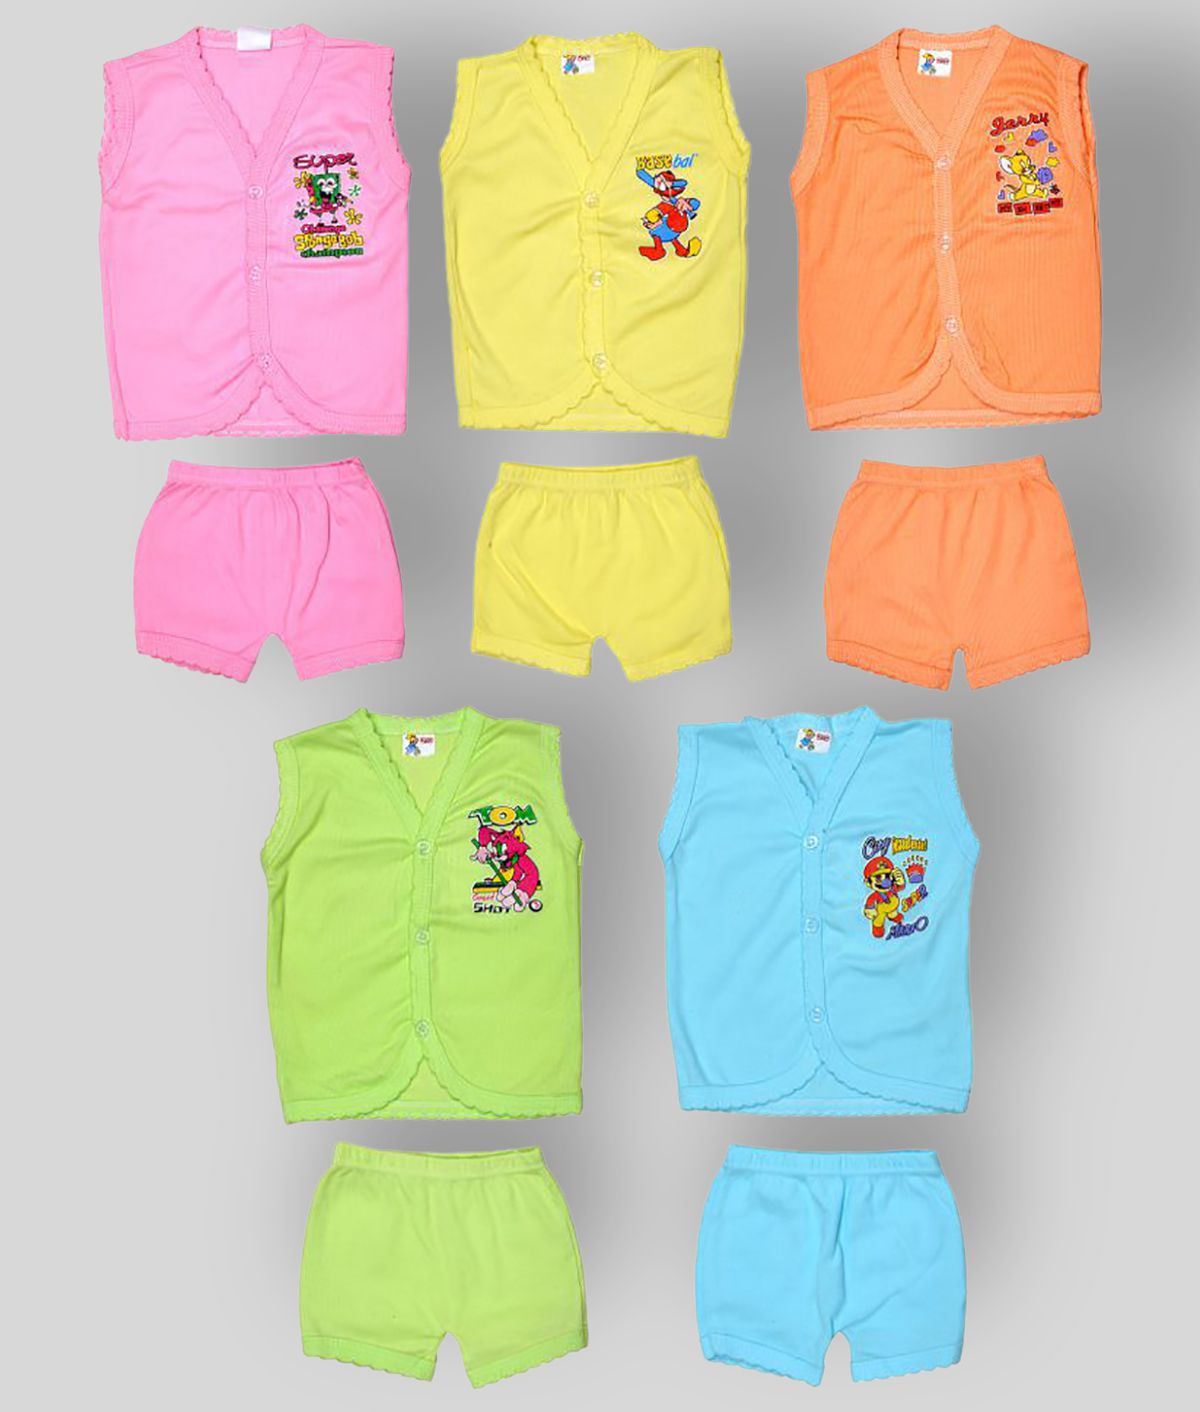 Sathiyas - Multicolor Cotton Top & Shorts For Baby Boy,Baby Girl ( Pack of 5 )